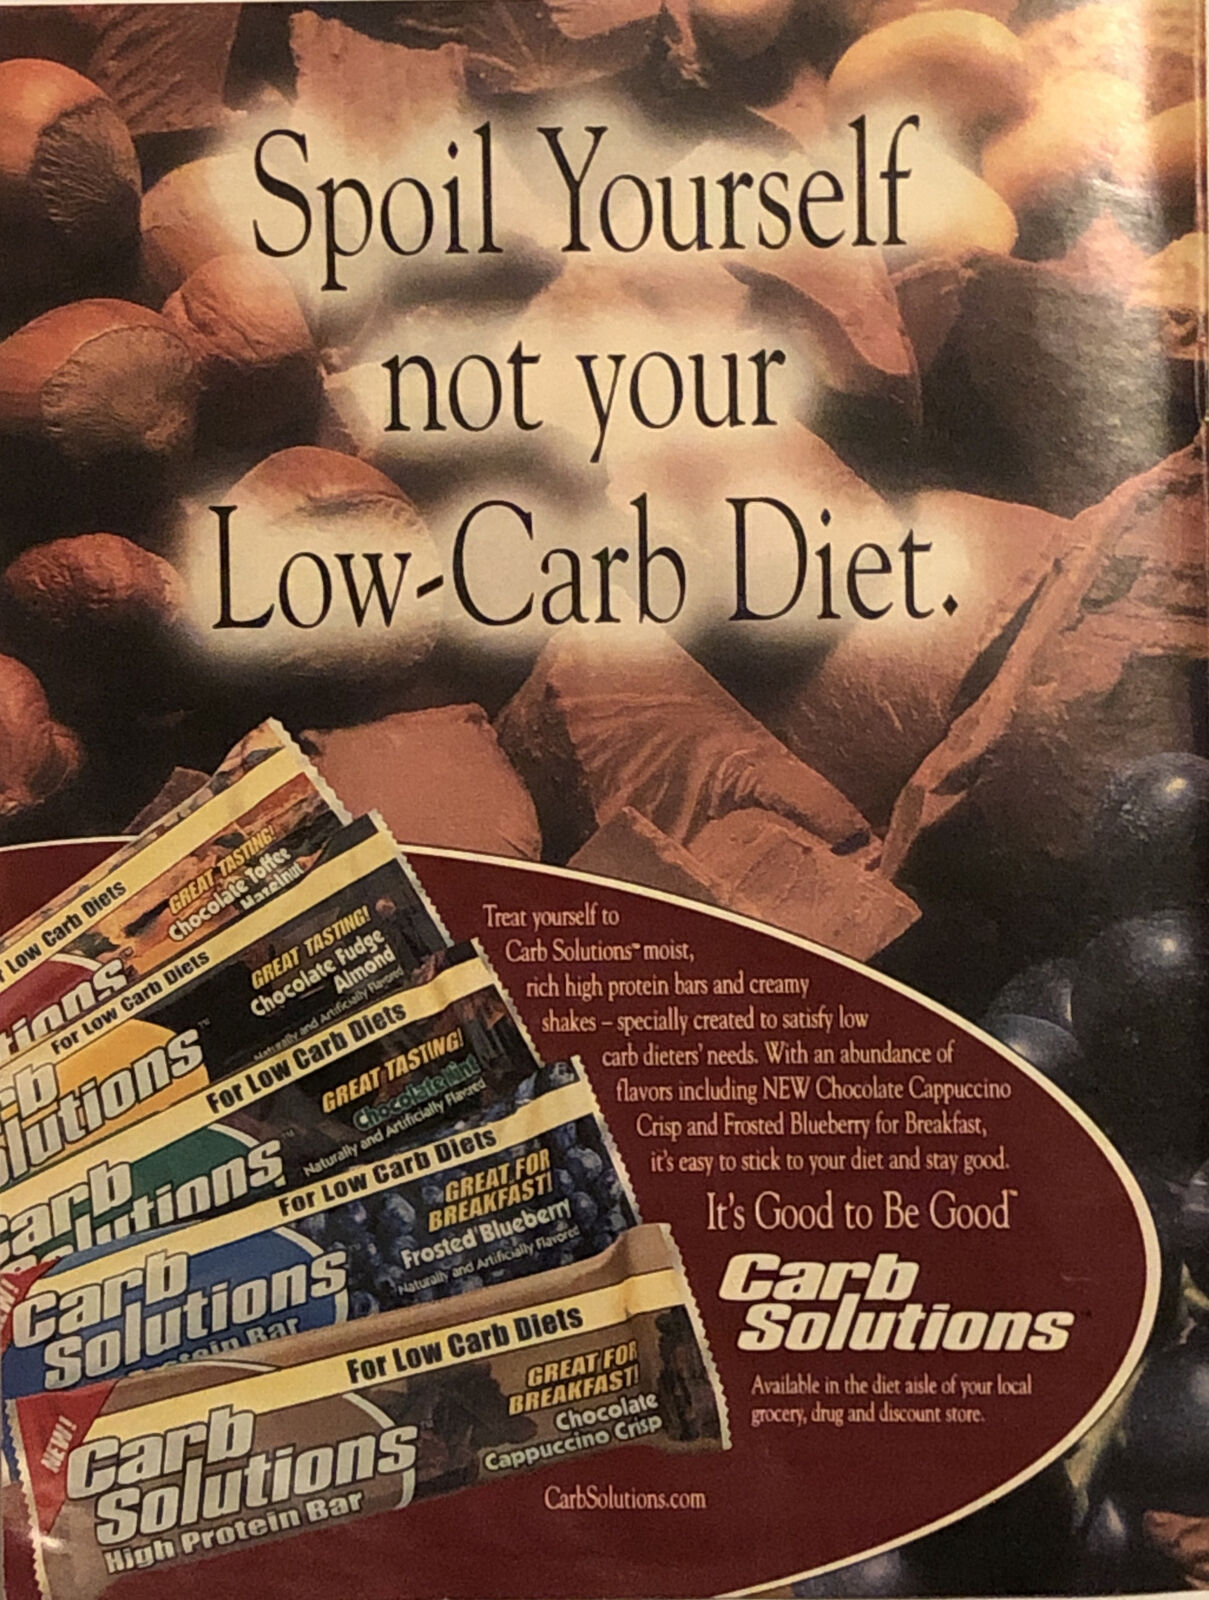 PRINT AD 2002 Carb Solutions High Protein Bar - Spoil Yourself Not Low Carb Diet